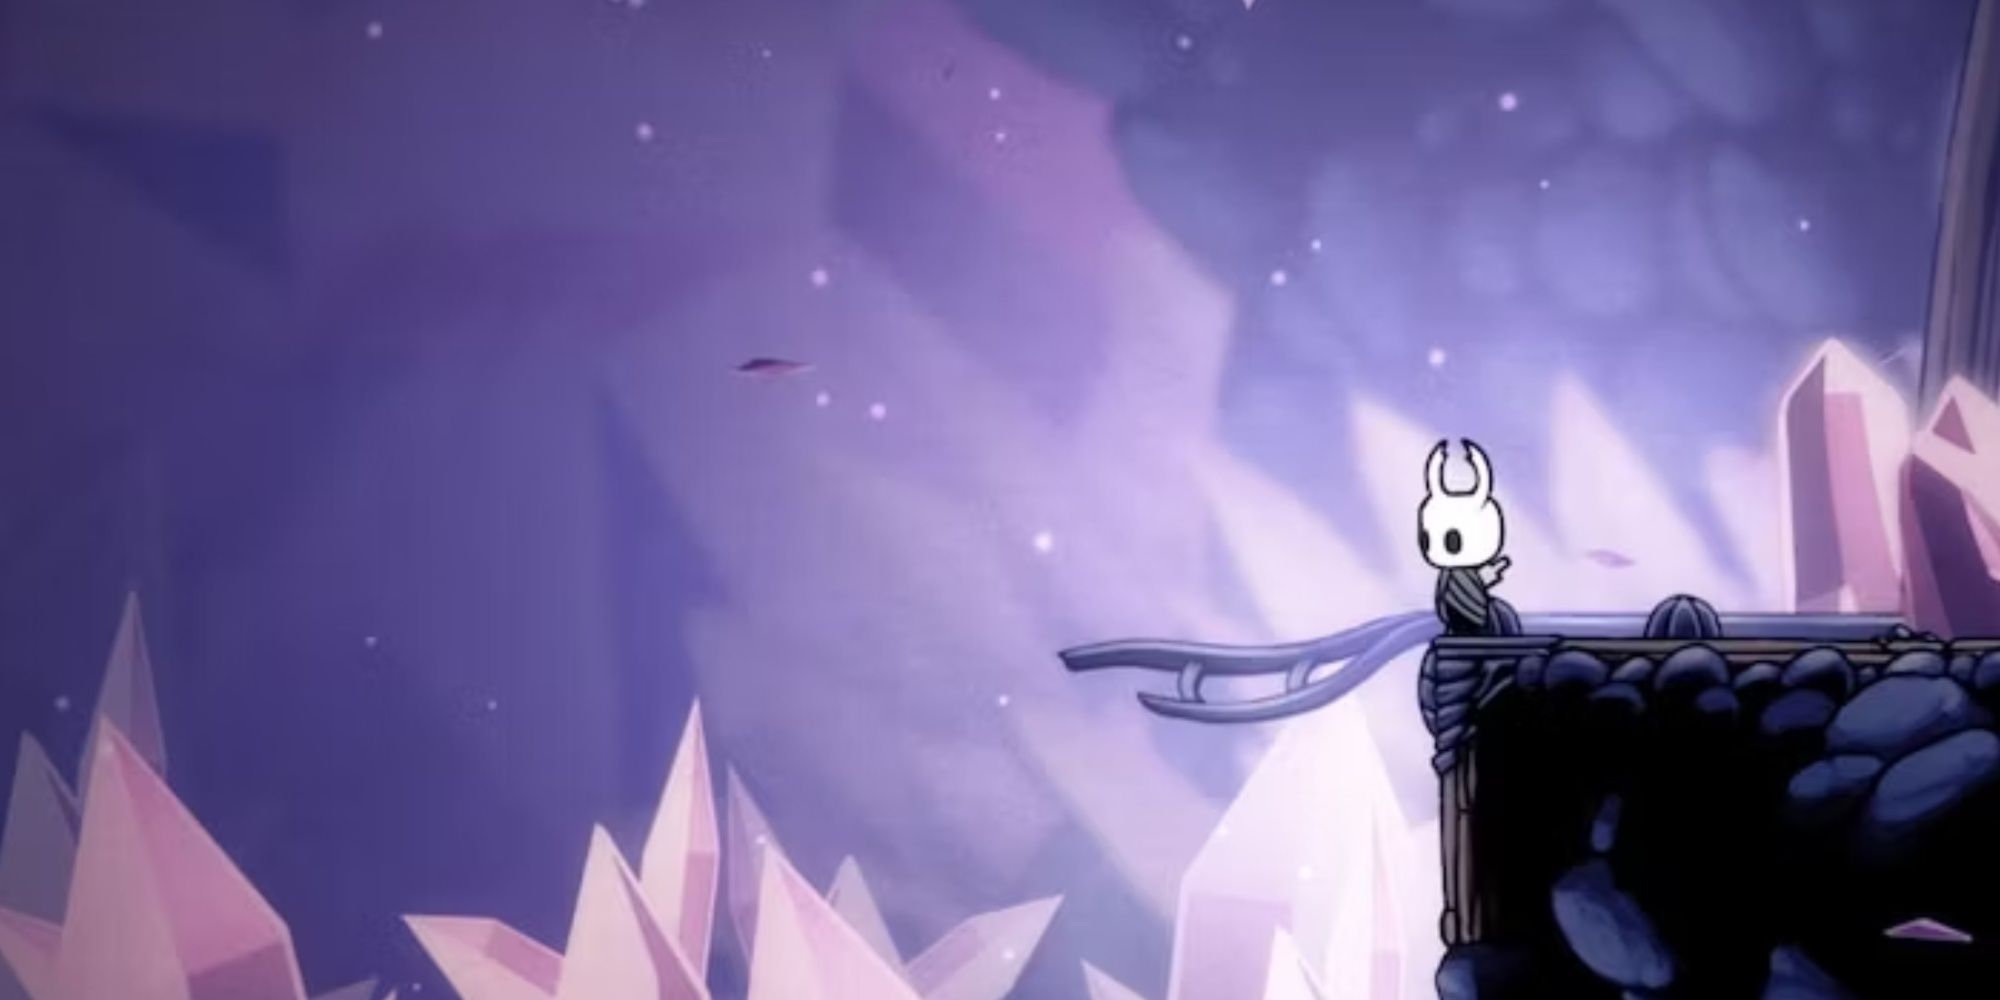 The Knight in Crystal Peak in Hollow Knight